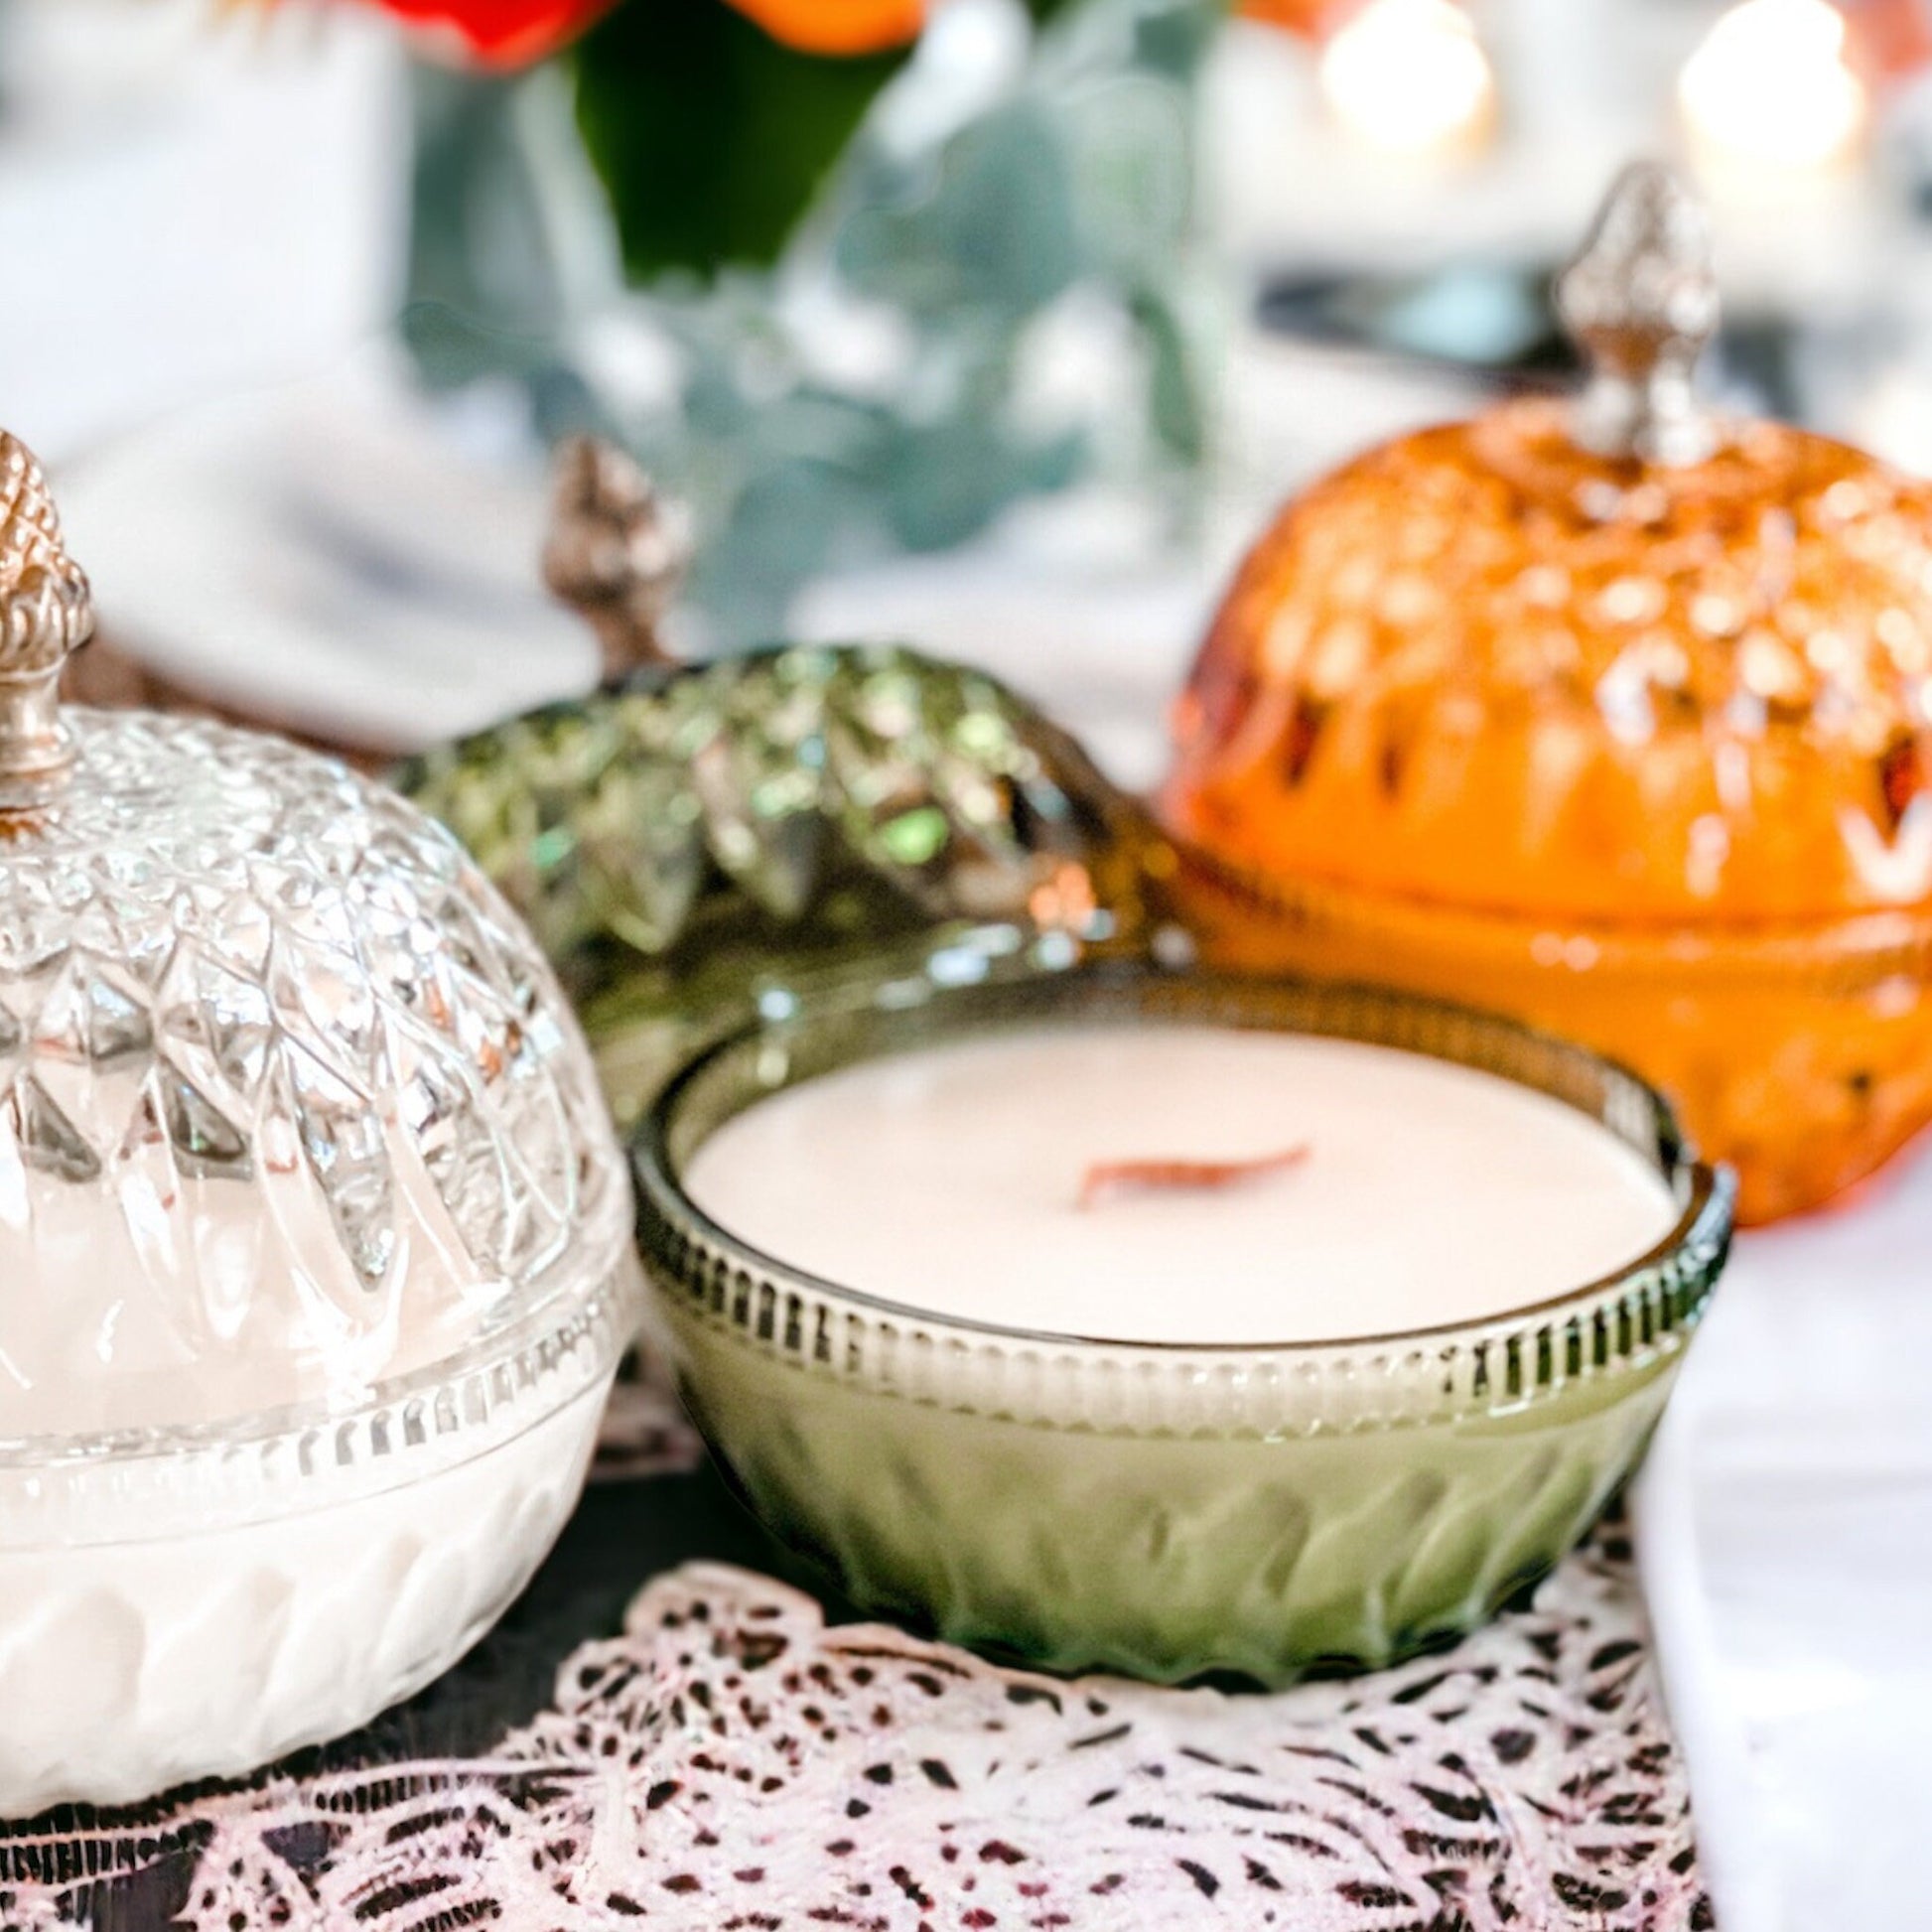 Pumpkin Spice Soy Candle in Vintage Pumpkin Candy Dish